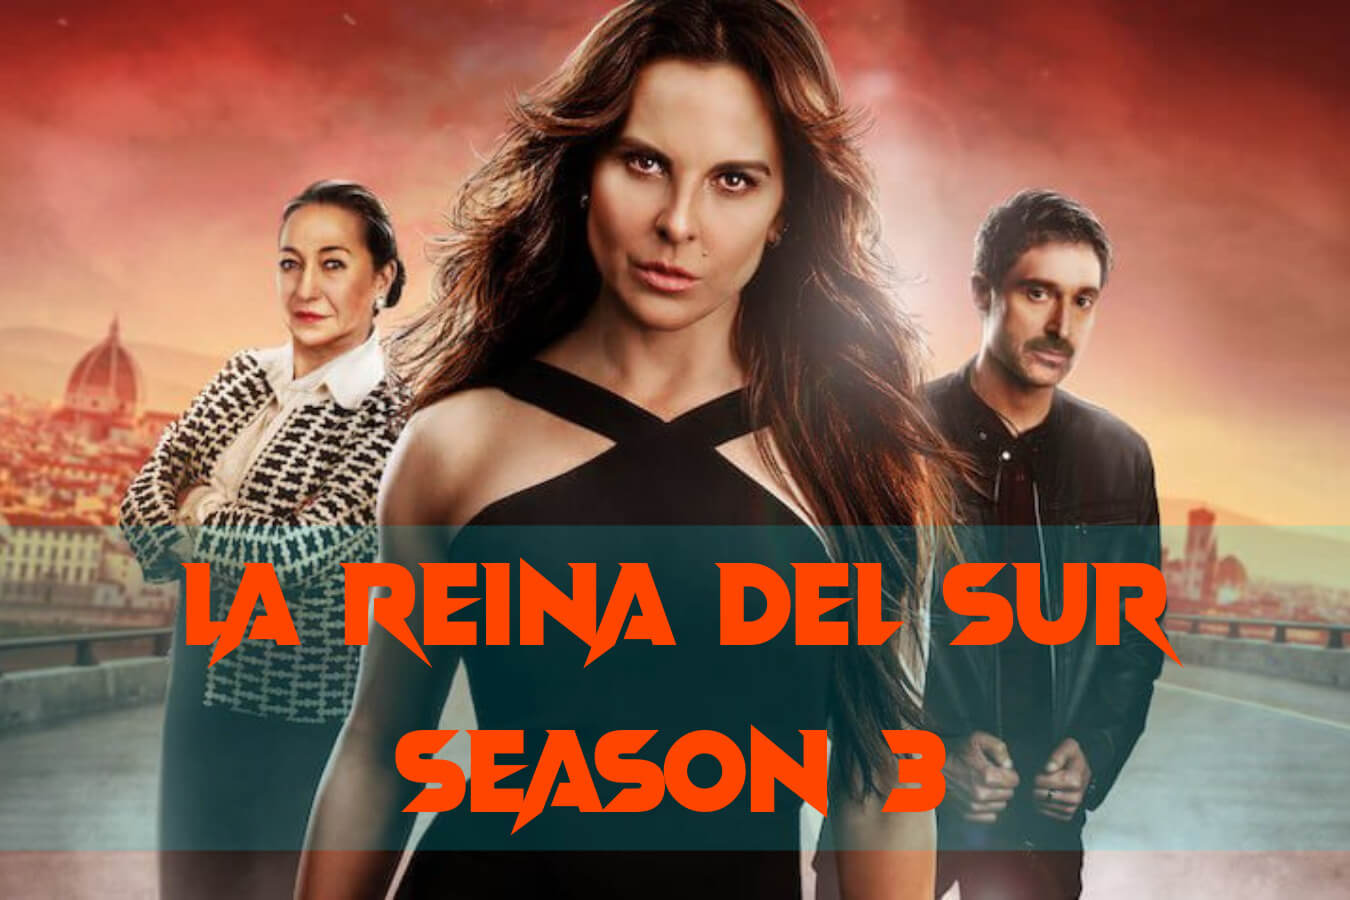 Is There Any News Of La Reina Del Sur Season 3 Trailer?